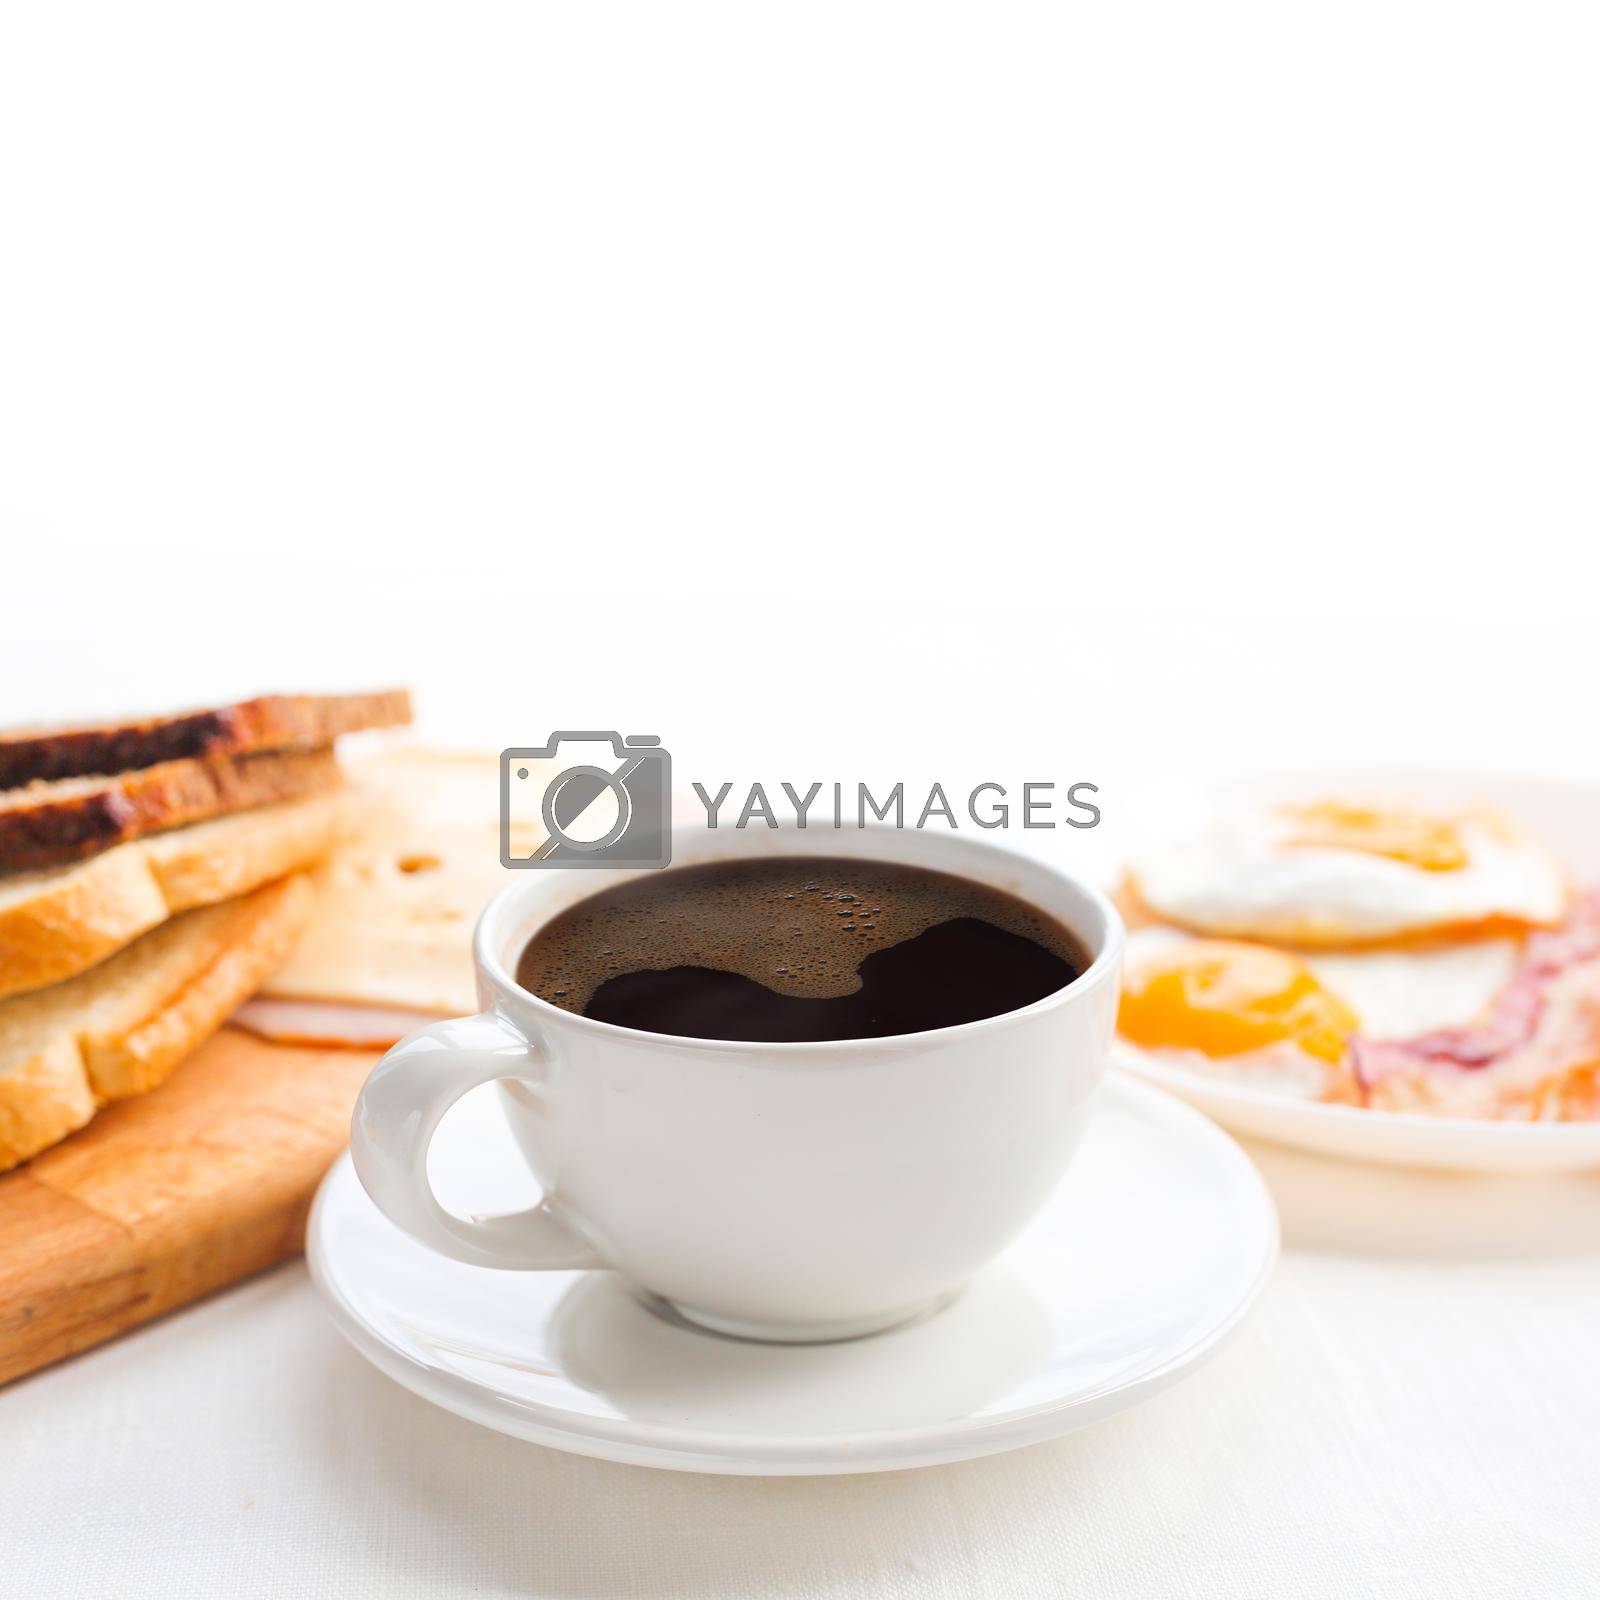 Royalty free image of Breakfast with coffee on table by destillat